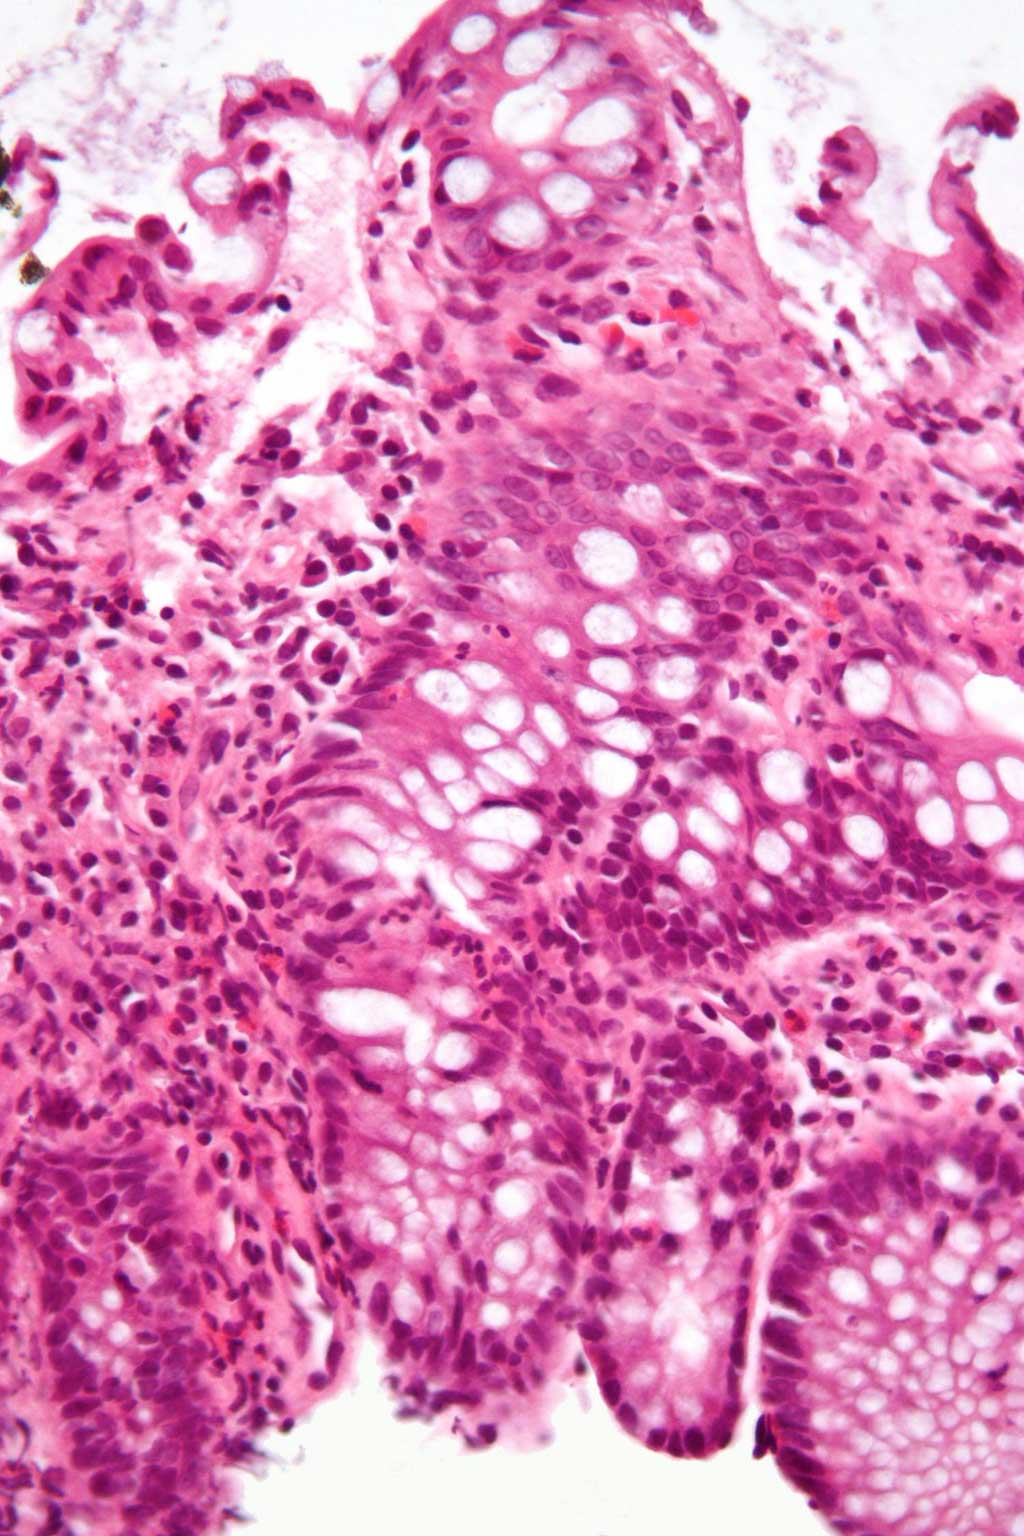 Image: Micrograph showing inflammation of the large bowel in a case of inflammatory bowel disease (Photo courtesy of Wikimedia Commons)